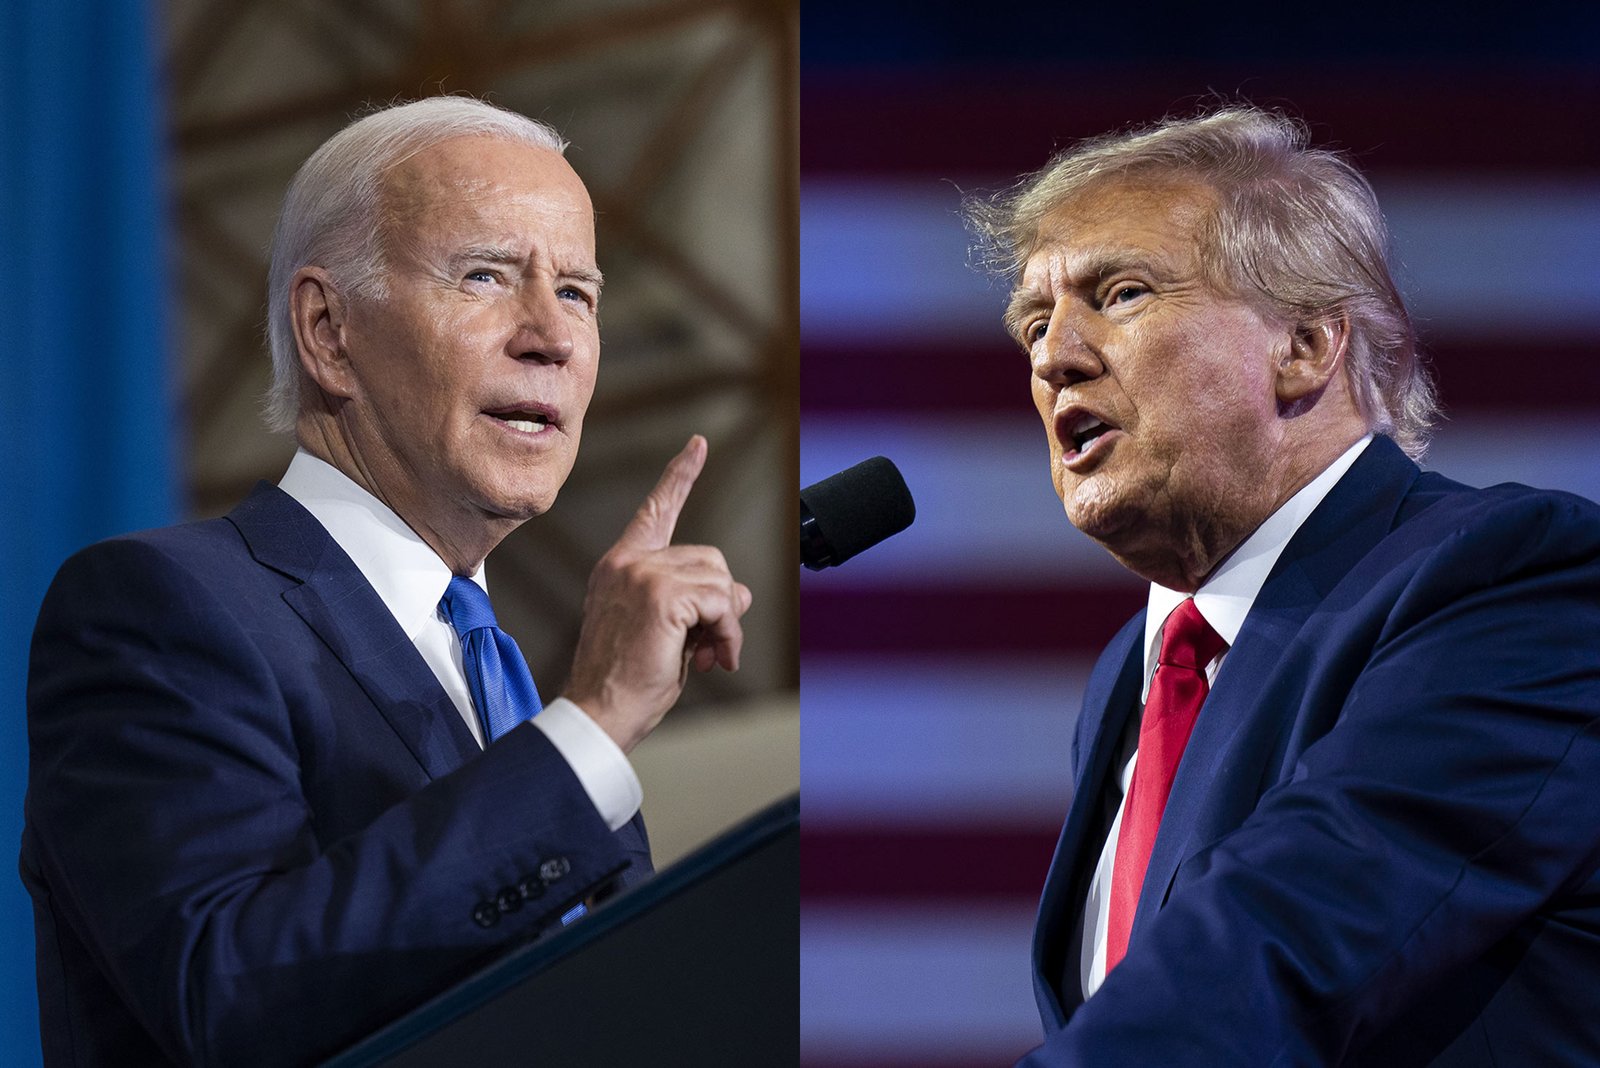 Will Biden allow Trump to go to prison? US politics is at a danger point.